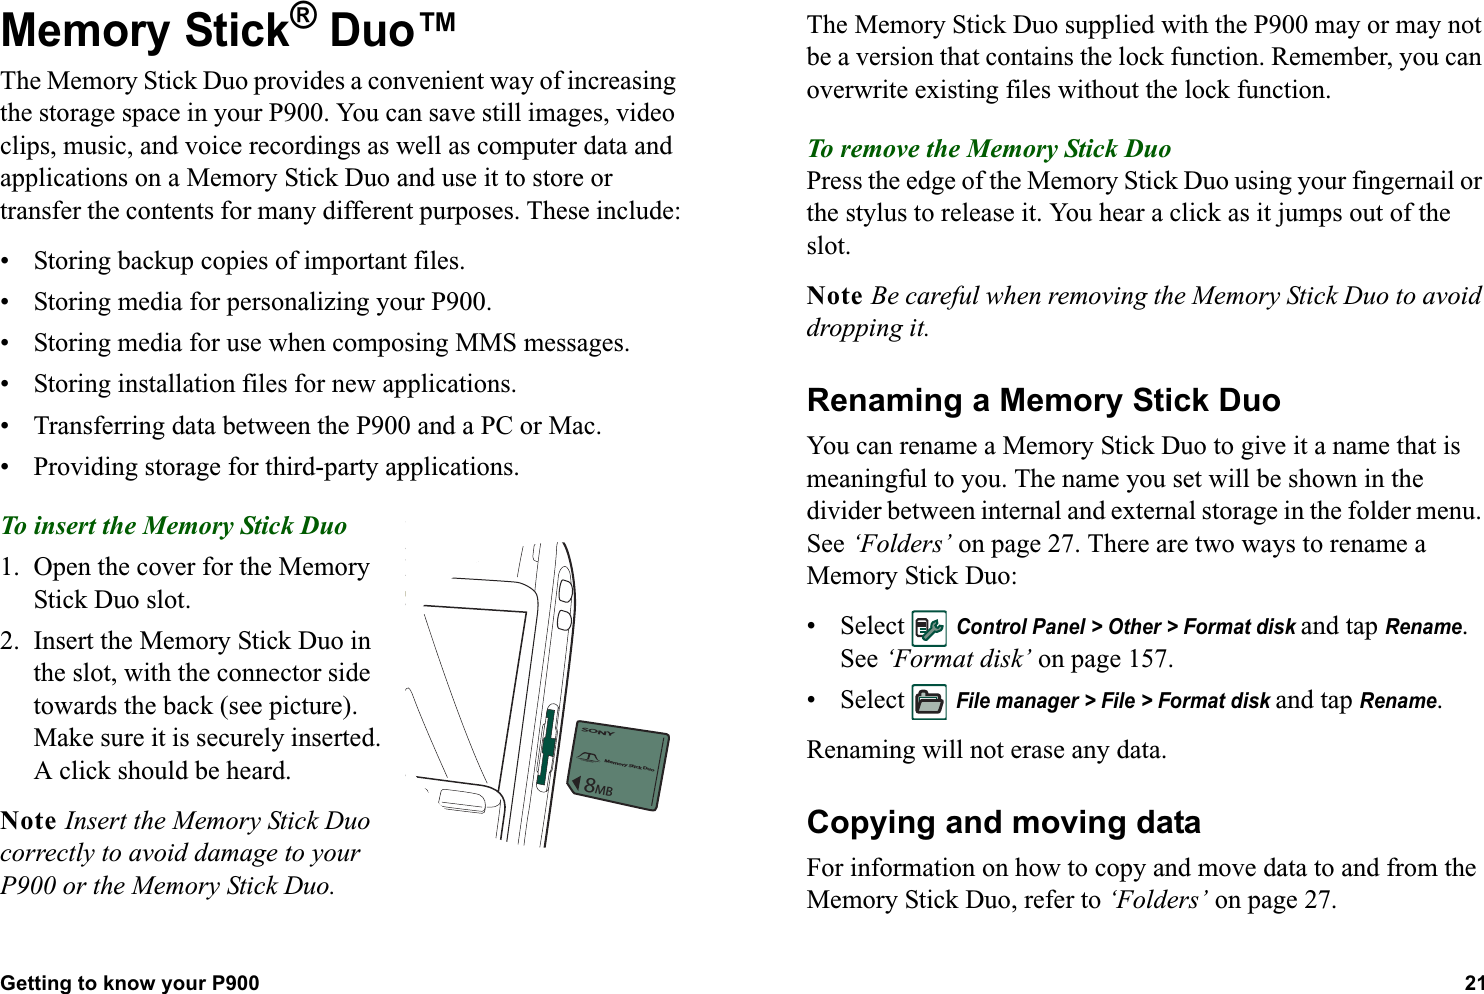 Getting to know your P900 21  Memory Stick® Duo™ The Memory Stick Duo provides a convenient way of increasing the storage space in your P900. You can save still images, video clips, music, and voice recordings as well as computer data and applications on a Memory Stick Duo and use it to store or transfer the contents for many different purposes. These include:• Storing backup copies of important files.• Storing media for personalizing your P900.• Storing media for use when composing MMS messages.• Storing installation files for new applications.• Transferring data between the P900 and a PC or Mac.• Providing storage for third-party applications.To insert the Memory Stick Duo 1. Open the cover for the Memory Stick Duo slot.2. Insert the Memory Stick Duo in the slot, with the connector side towards the back (see picture).Make sure it is securely inserted. A click should be heard.Note Insert the Memory Stick Duo correctly to avoid damage to your P900 or the Memory Stick Duo.The Memory Stick Duo supplied with the P900 may or may not be a version that contains the lock function. Remember, you can overwrite existing files without the lock function.To remove the Memory Stick DuoPress the edge of the Memory Stick Duo using your fingernail or the stylus to release it. You hear a click as it jumps out of the slot.Note Be careful when removing the Memory Stick Duo to avoid dropping it.Renaming a Memory Stick DuoYou can rename a Memory Stick Duo to give it a name that is meaningful to you. The name you set will be shown in the divider between internal and external storage in the folder menu. See ‘Folders’ on page 27. There are two ways to rename a Memory Stick Duo:• Select Control Panel &gt; Other &gt; Format disk and tap Rename. See ‘Format disk’ on page 157.• Select File manager &gt; File &gt; Format disk and tap Rename. Renaming will not erase any data.Copying and moving dataFor information on how to copy and move data to and from the Memory Stick Duo, refer to ‘Folders’ on page 27.SONYMemory Stick Duo8MB